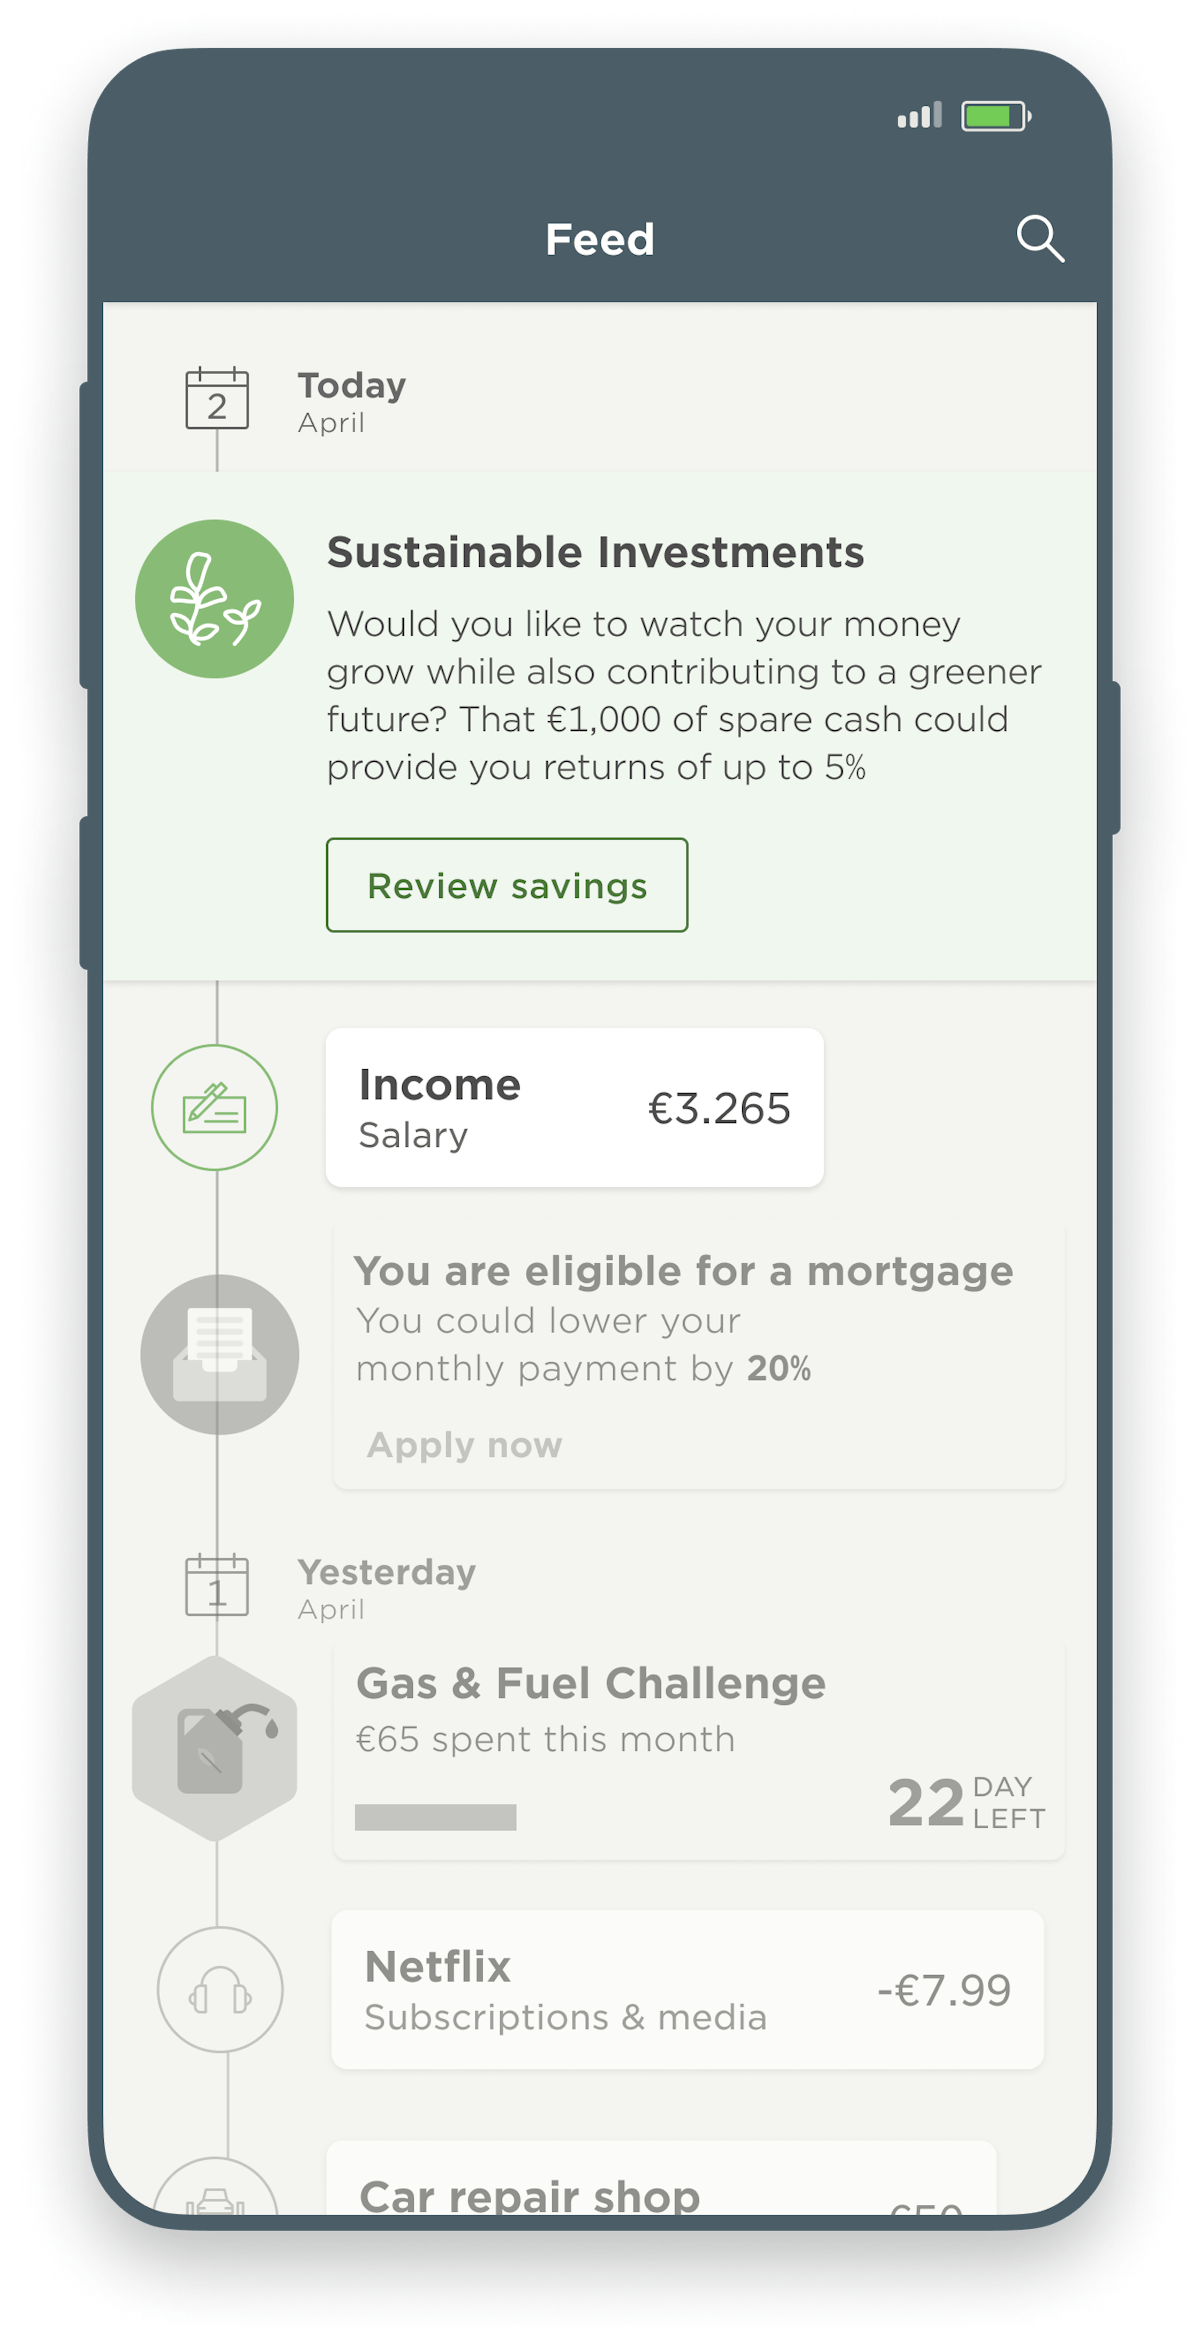 Screenshot of notification in mobile banking app feed